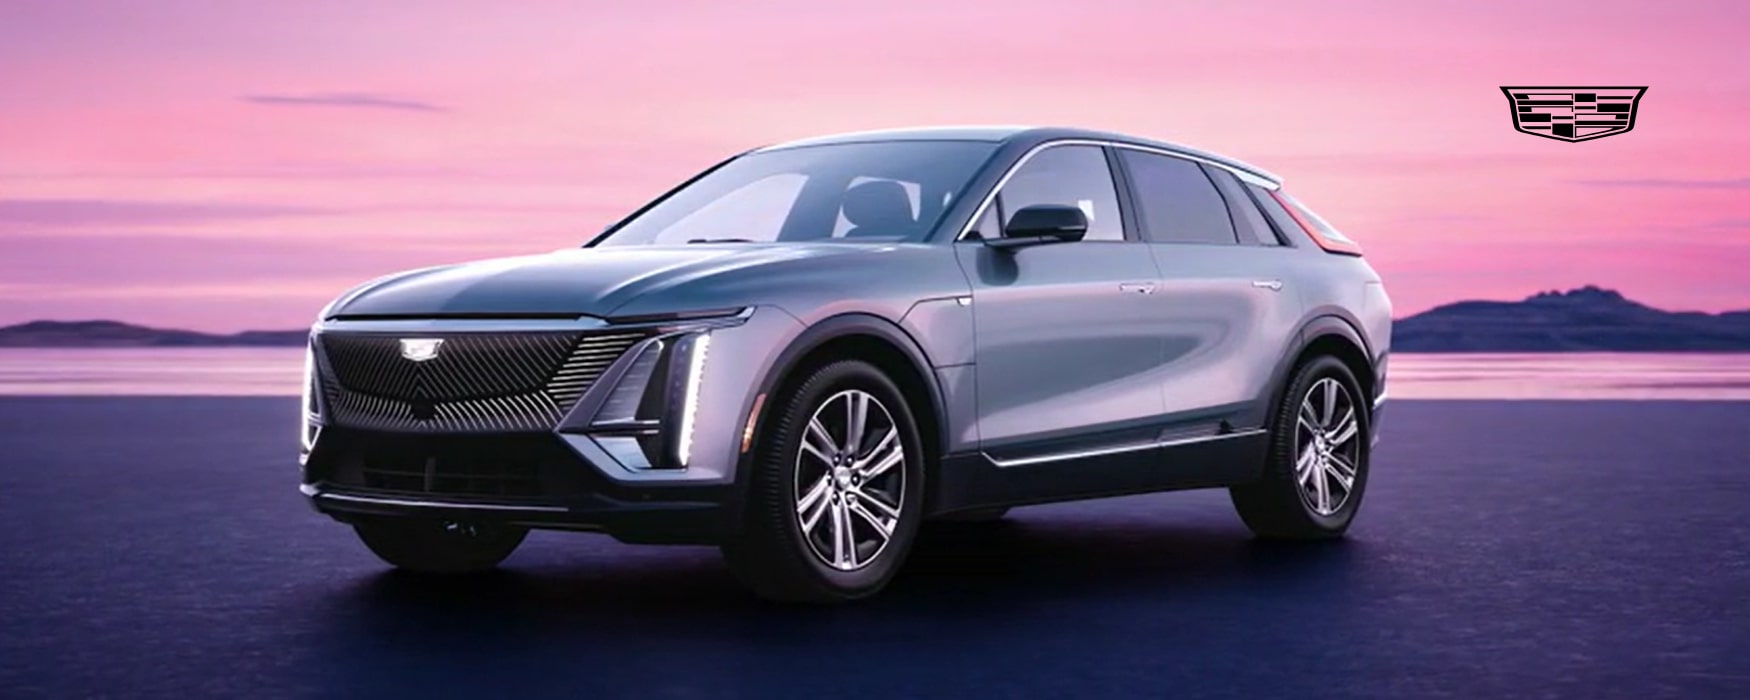 Cadillac Homepage Offer